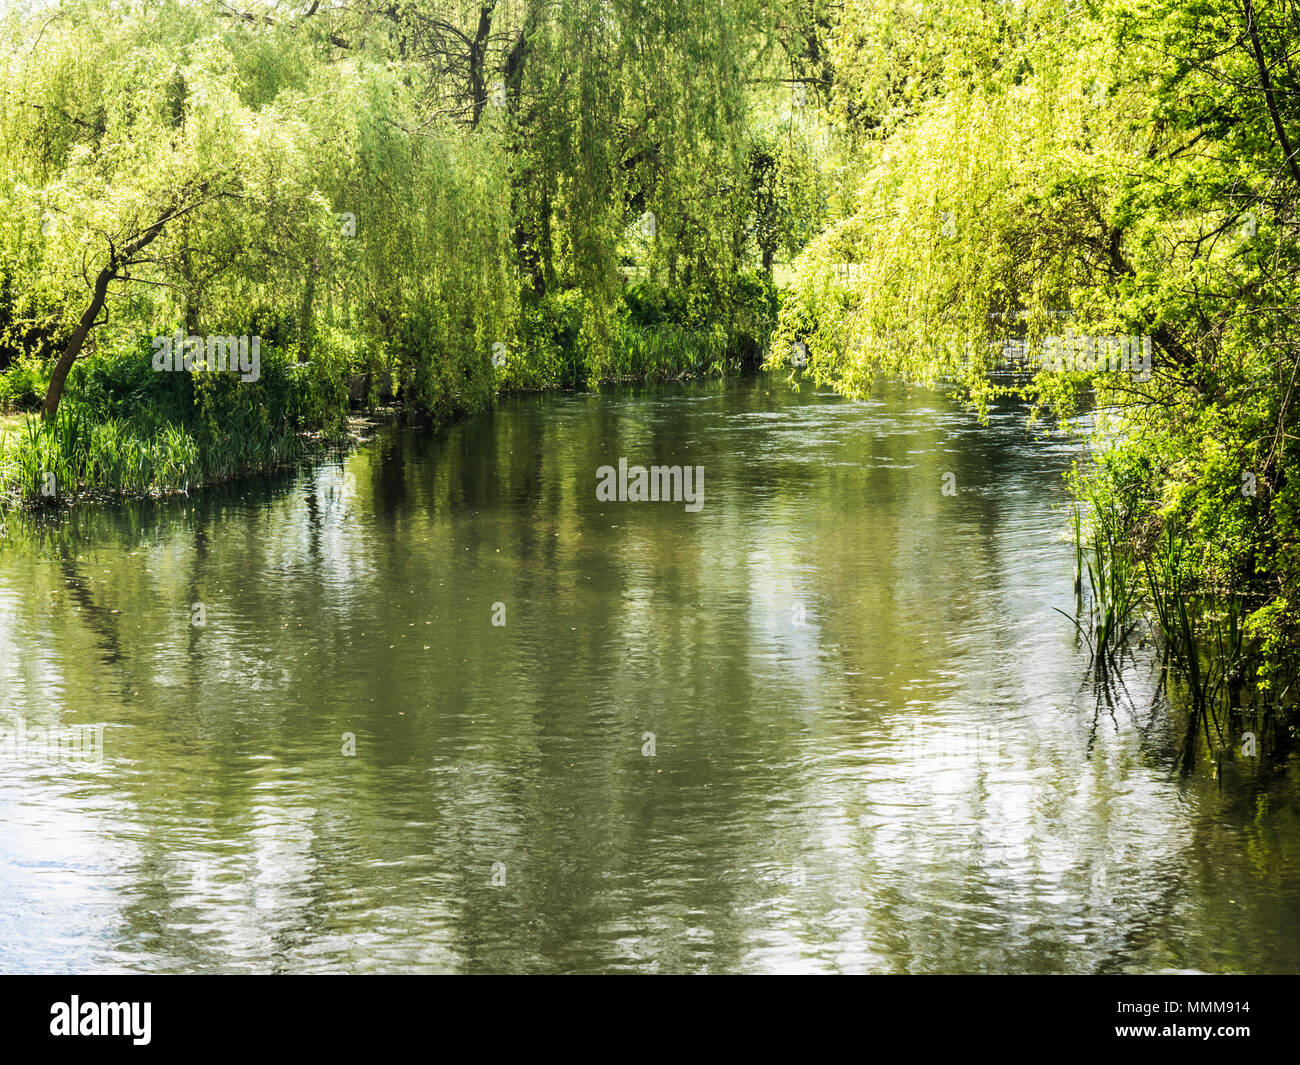 A sunny Spring day along the River Kennet in Wiltshire. Stock Photo